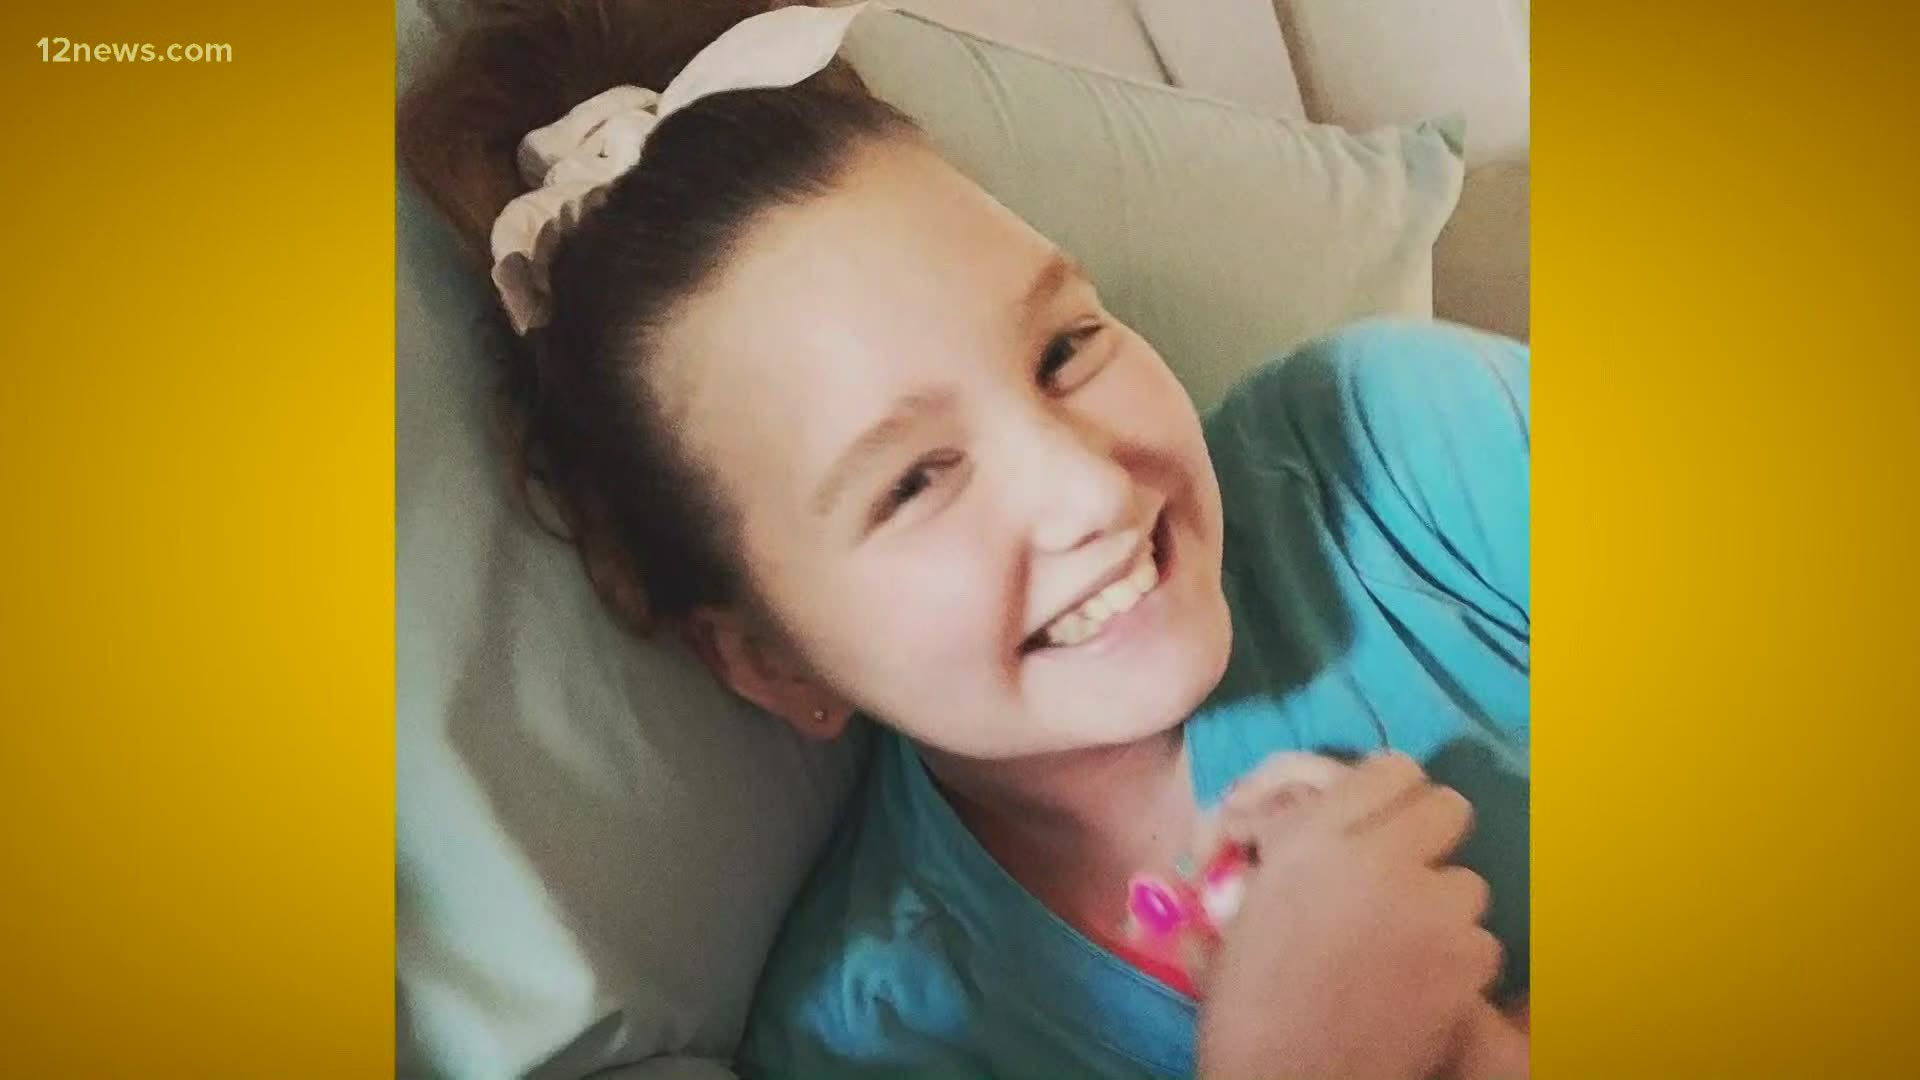 Macie Schnepf is a fighter. Three years ago she was diagnosed with Ewing’s Sarcoma cancer that struck her leg. And now she's in need of a new heart.